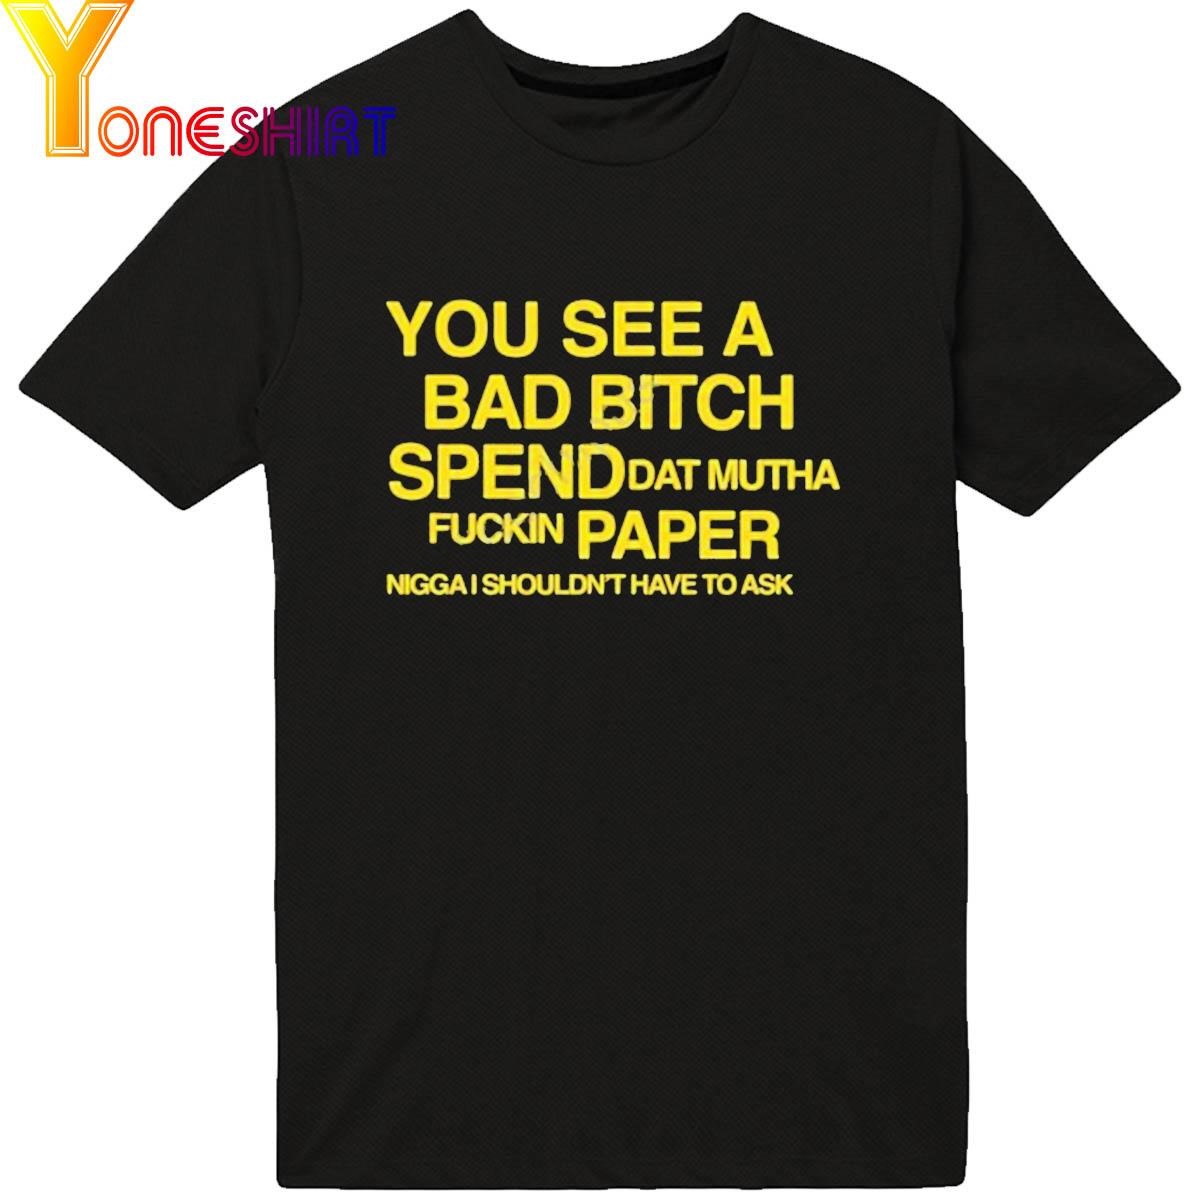 You See A Bad Bitch Spend Dat Mutha Fuckin Paper Nigga I Shouldn't Have To Ask Shirt